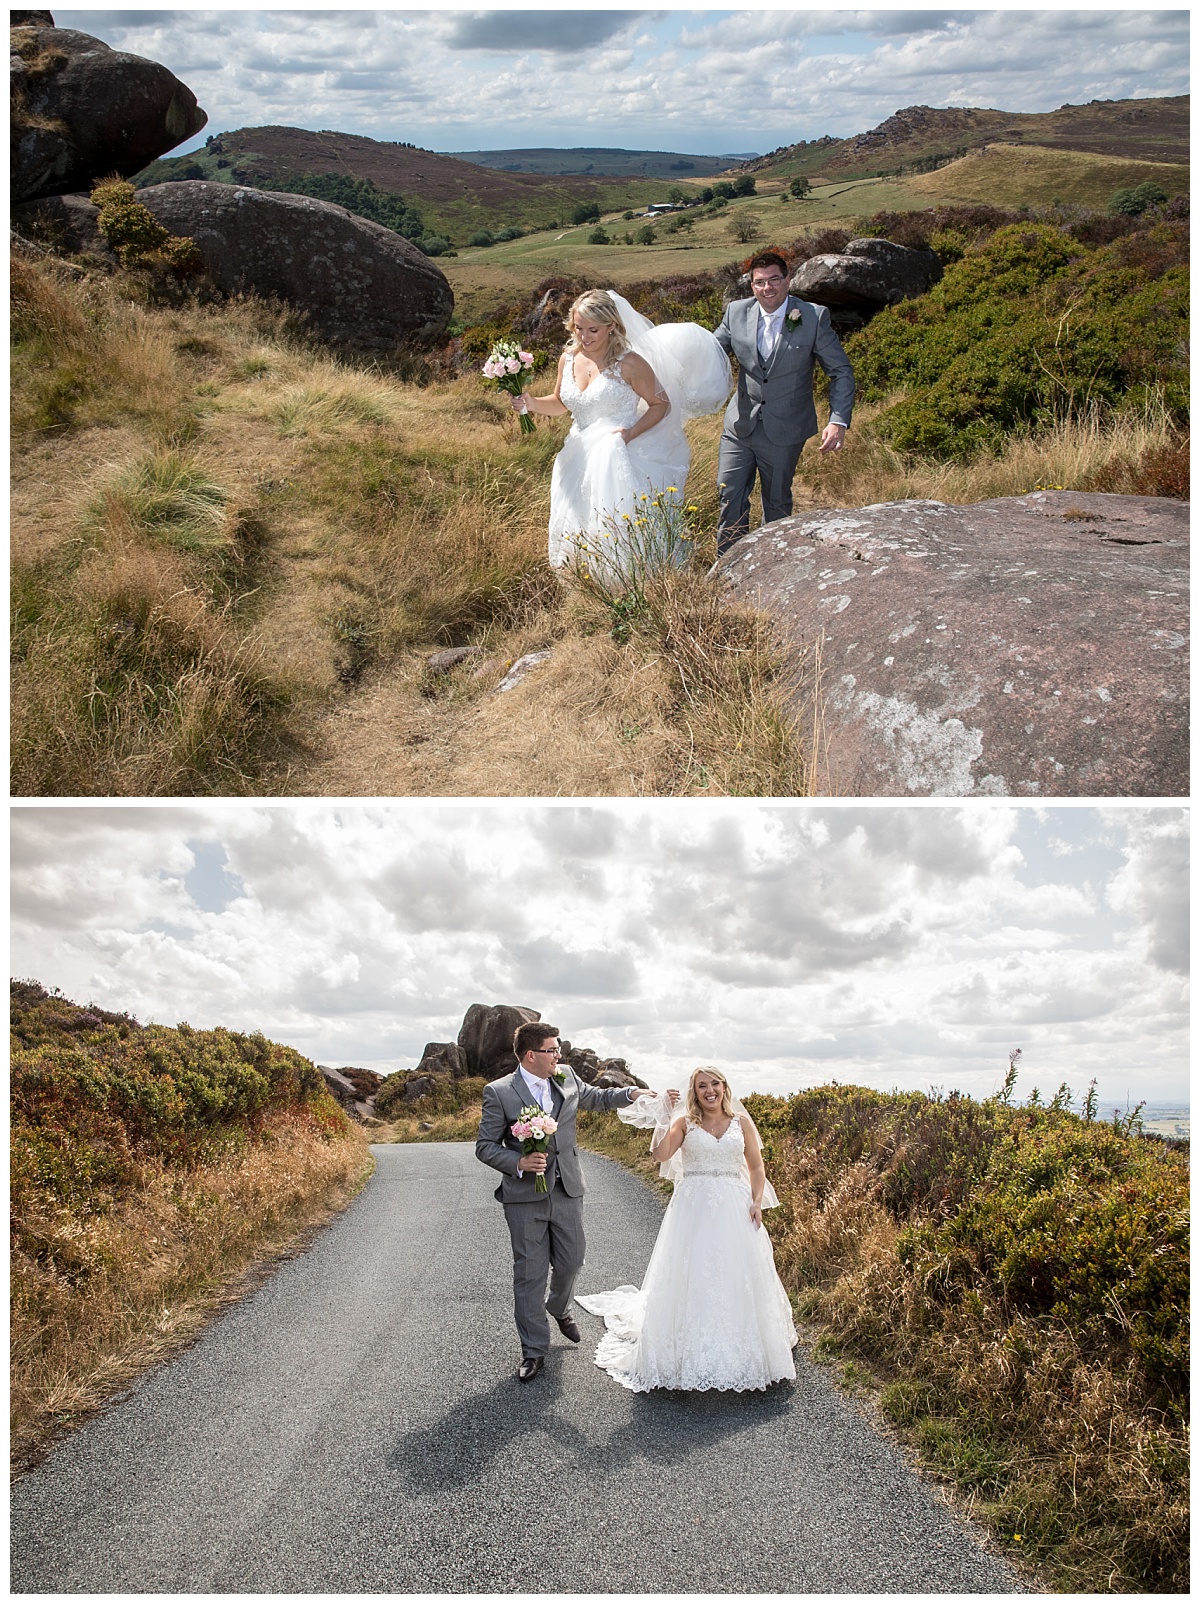 Wedding Photography Manchester - Lisa and James's The Three Horseshoes Country Inn wedding 32